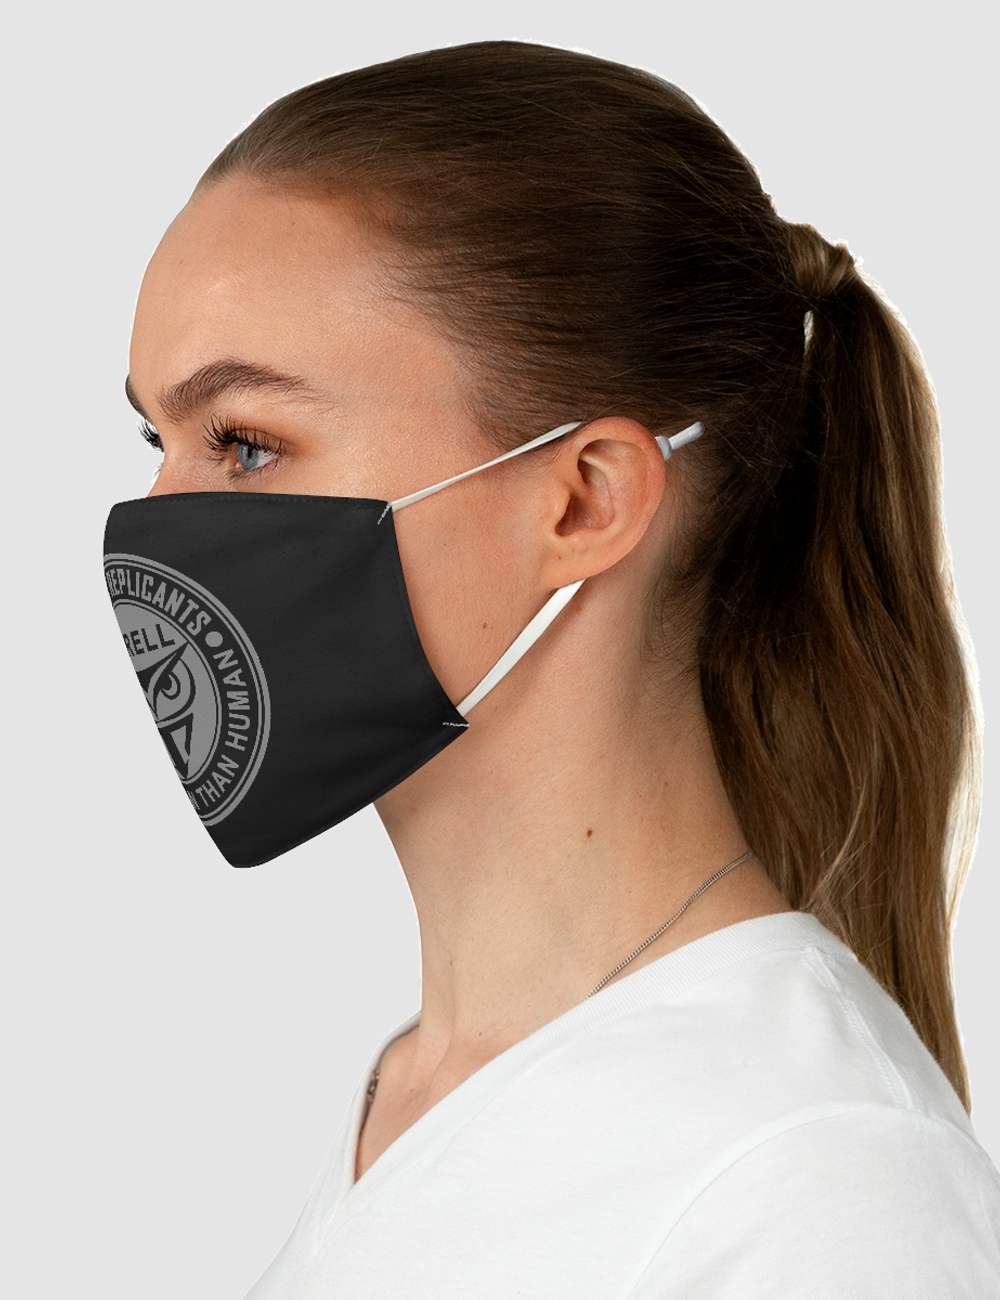 Tyrell Corporation Two-Layer Polyester Fabric Face Mask OniTakai